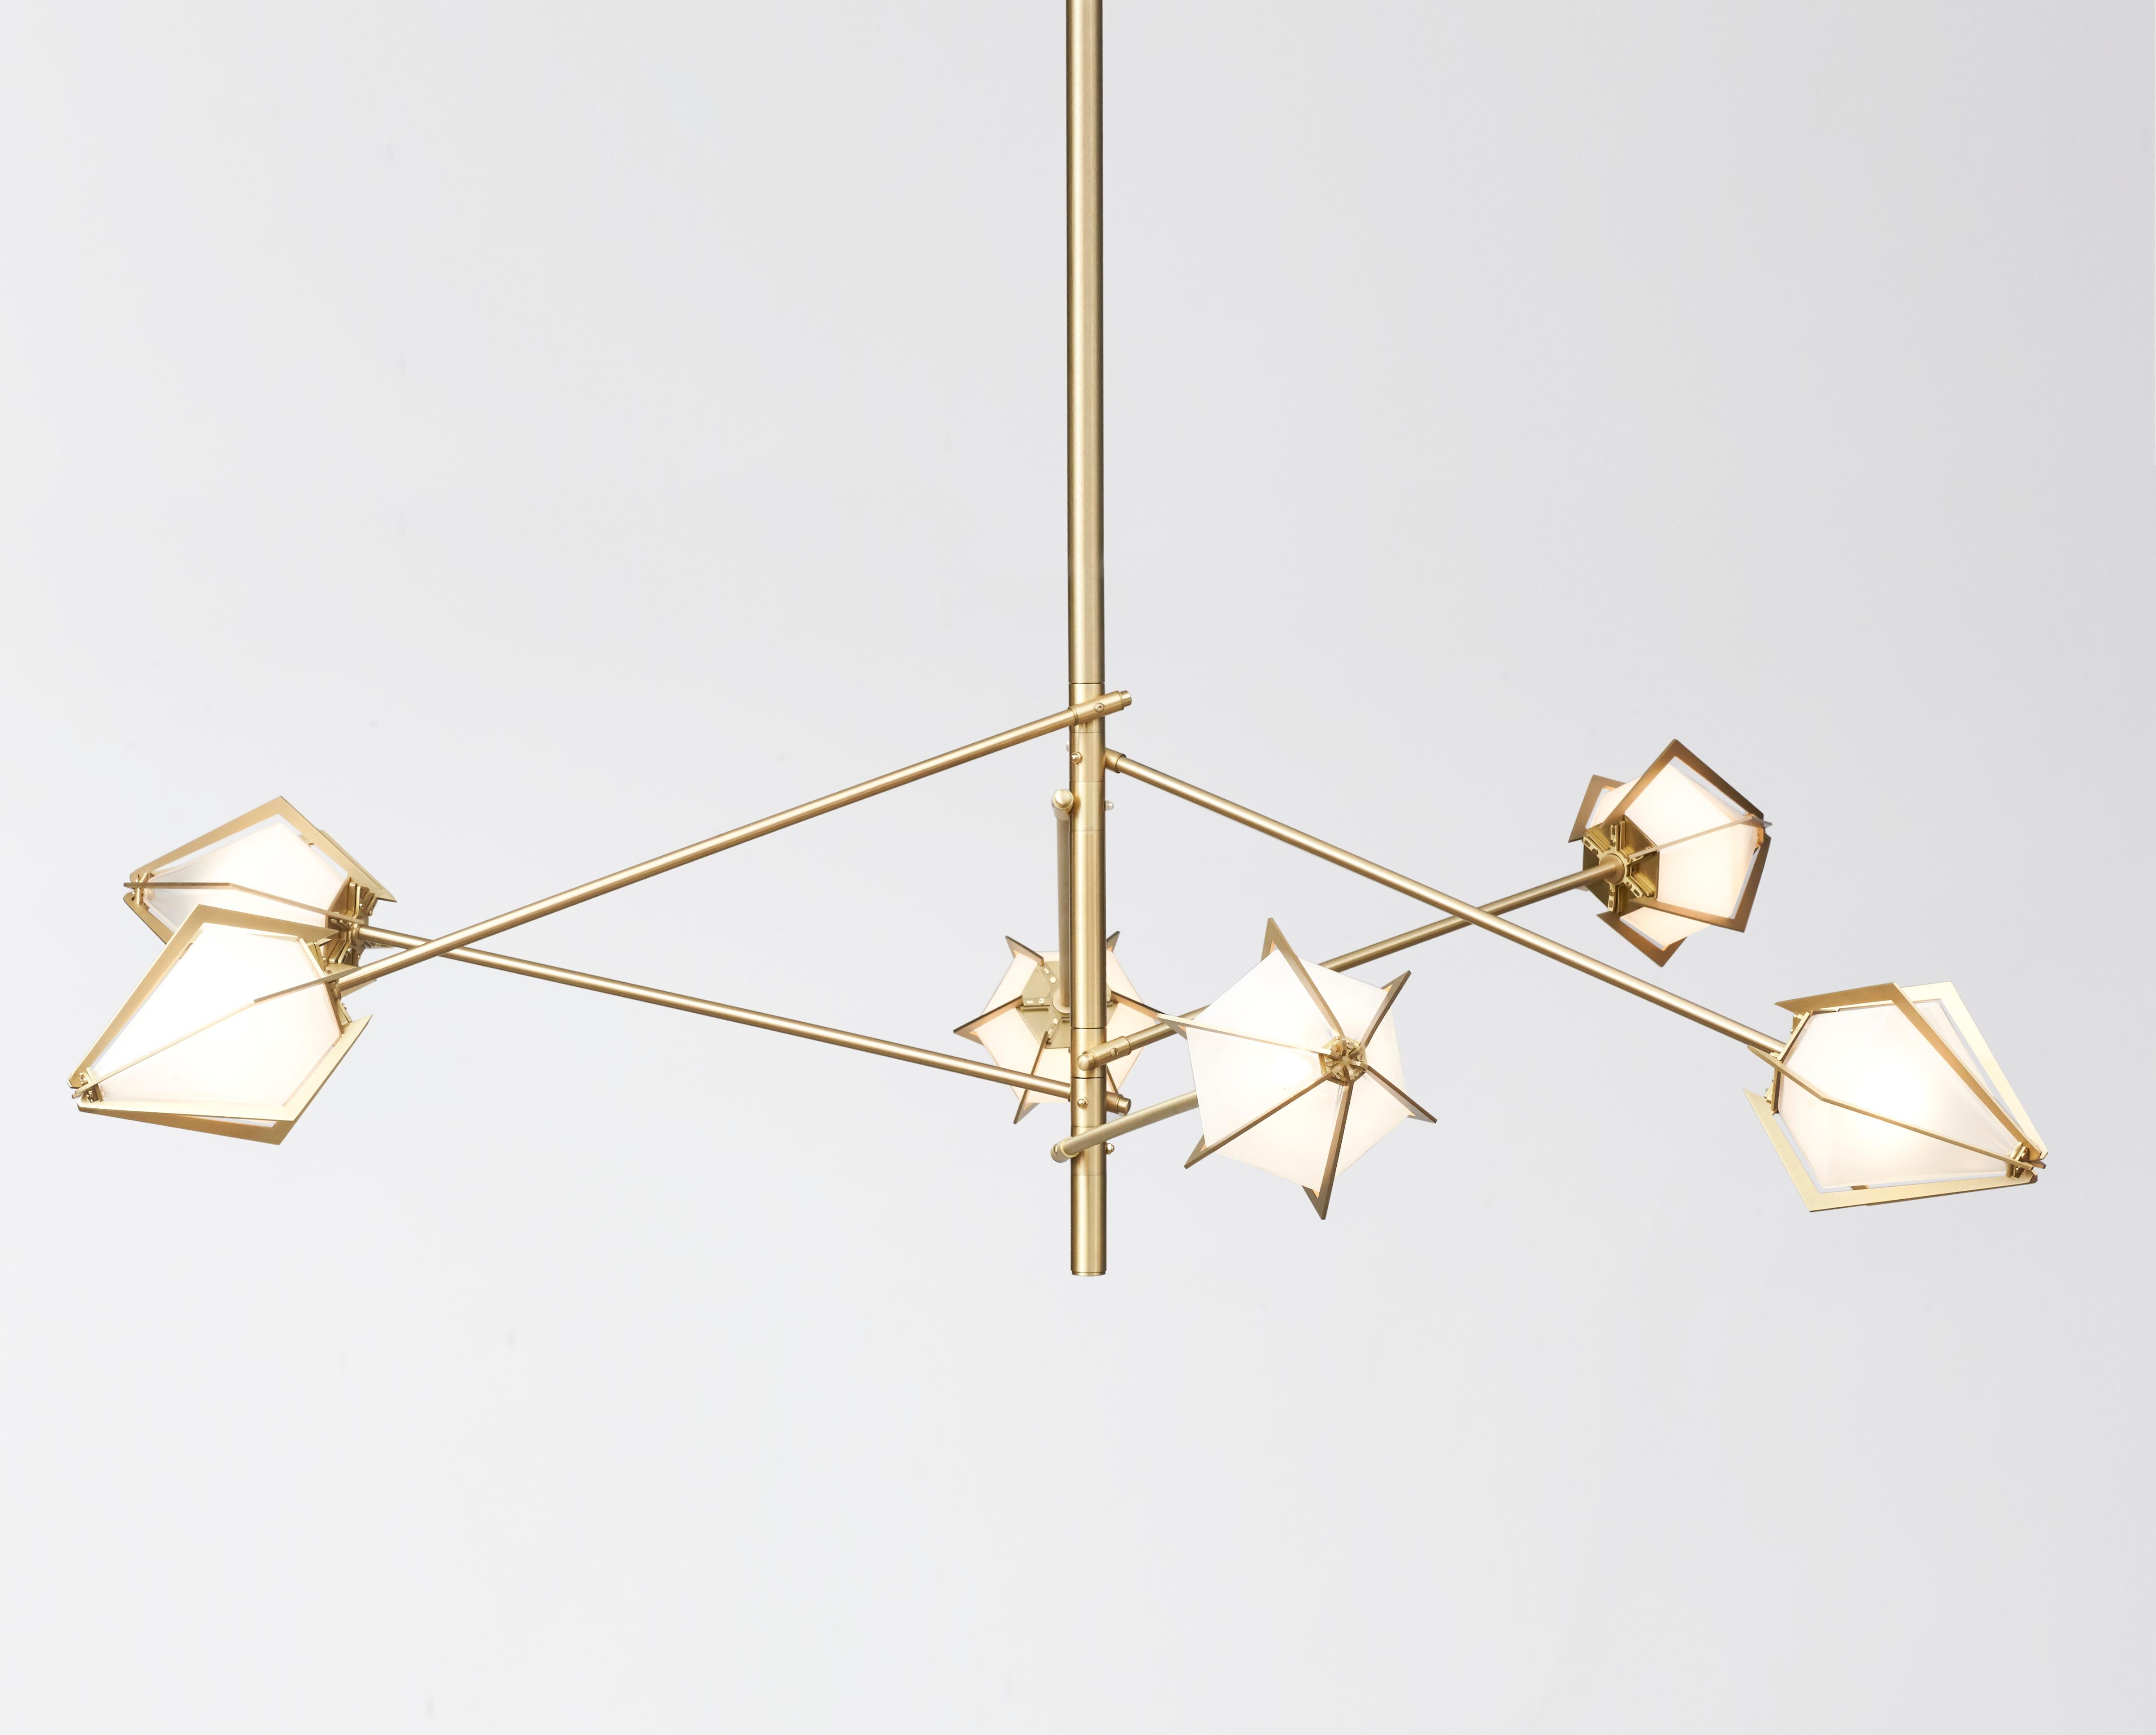 Harlow spoke chandelier is an elegant sculptural light fixture inspired by jewelry design featuring a mold-blown glass gem in a chic metallic setting to create an asymmetrical starburst of light. Harlow is available in various color ways, and held